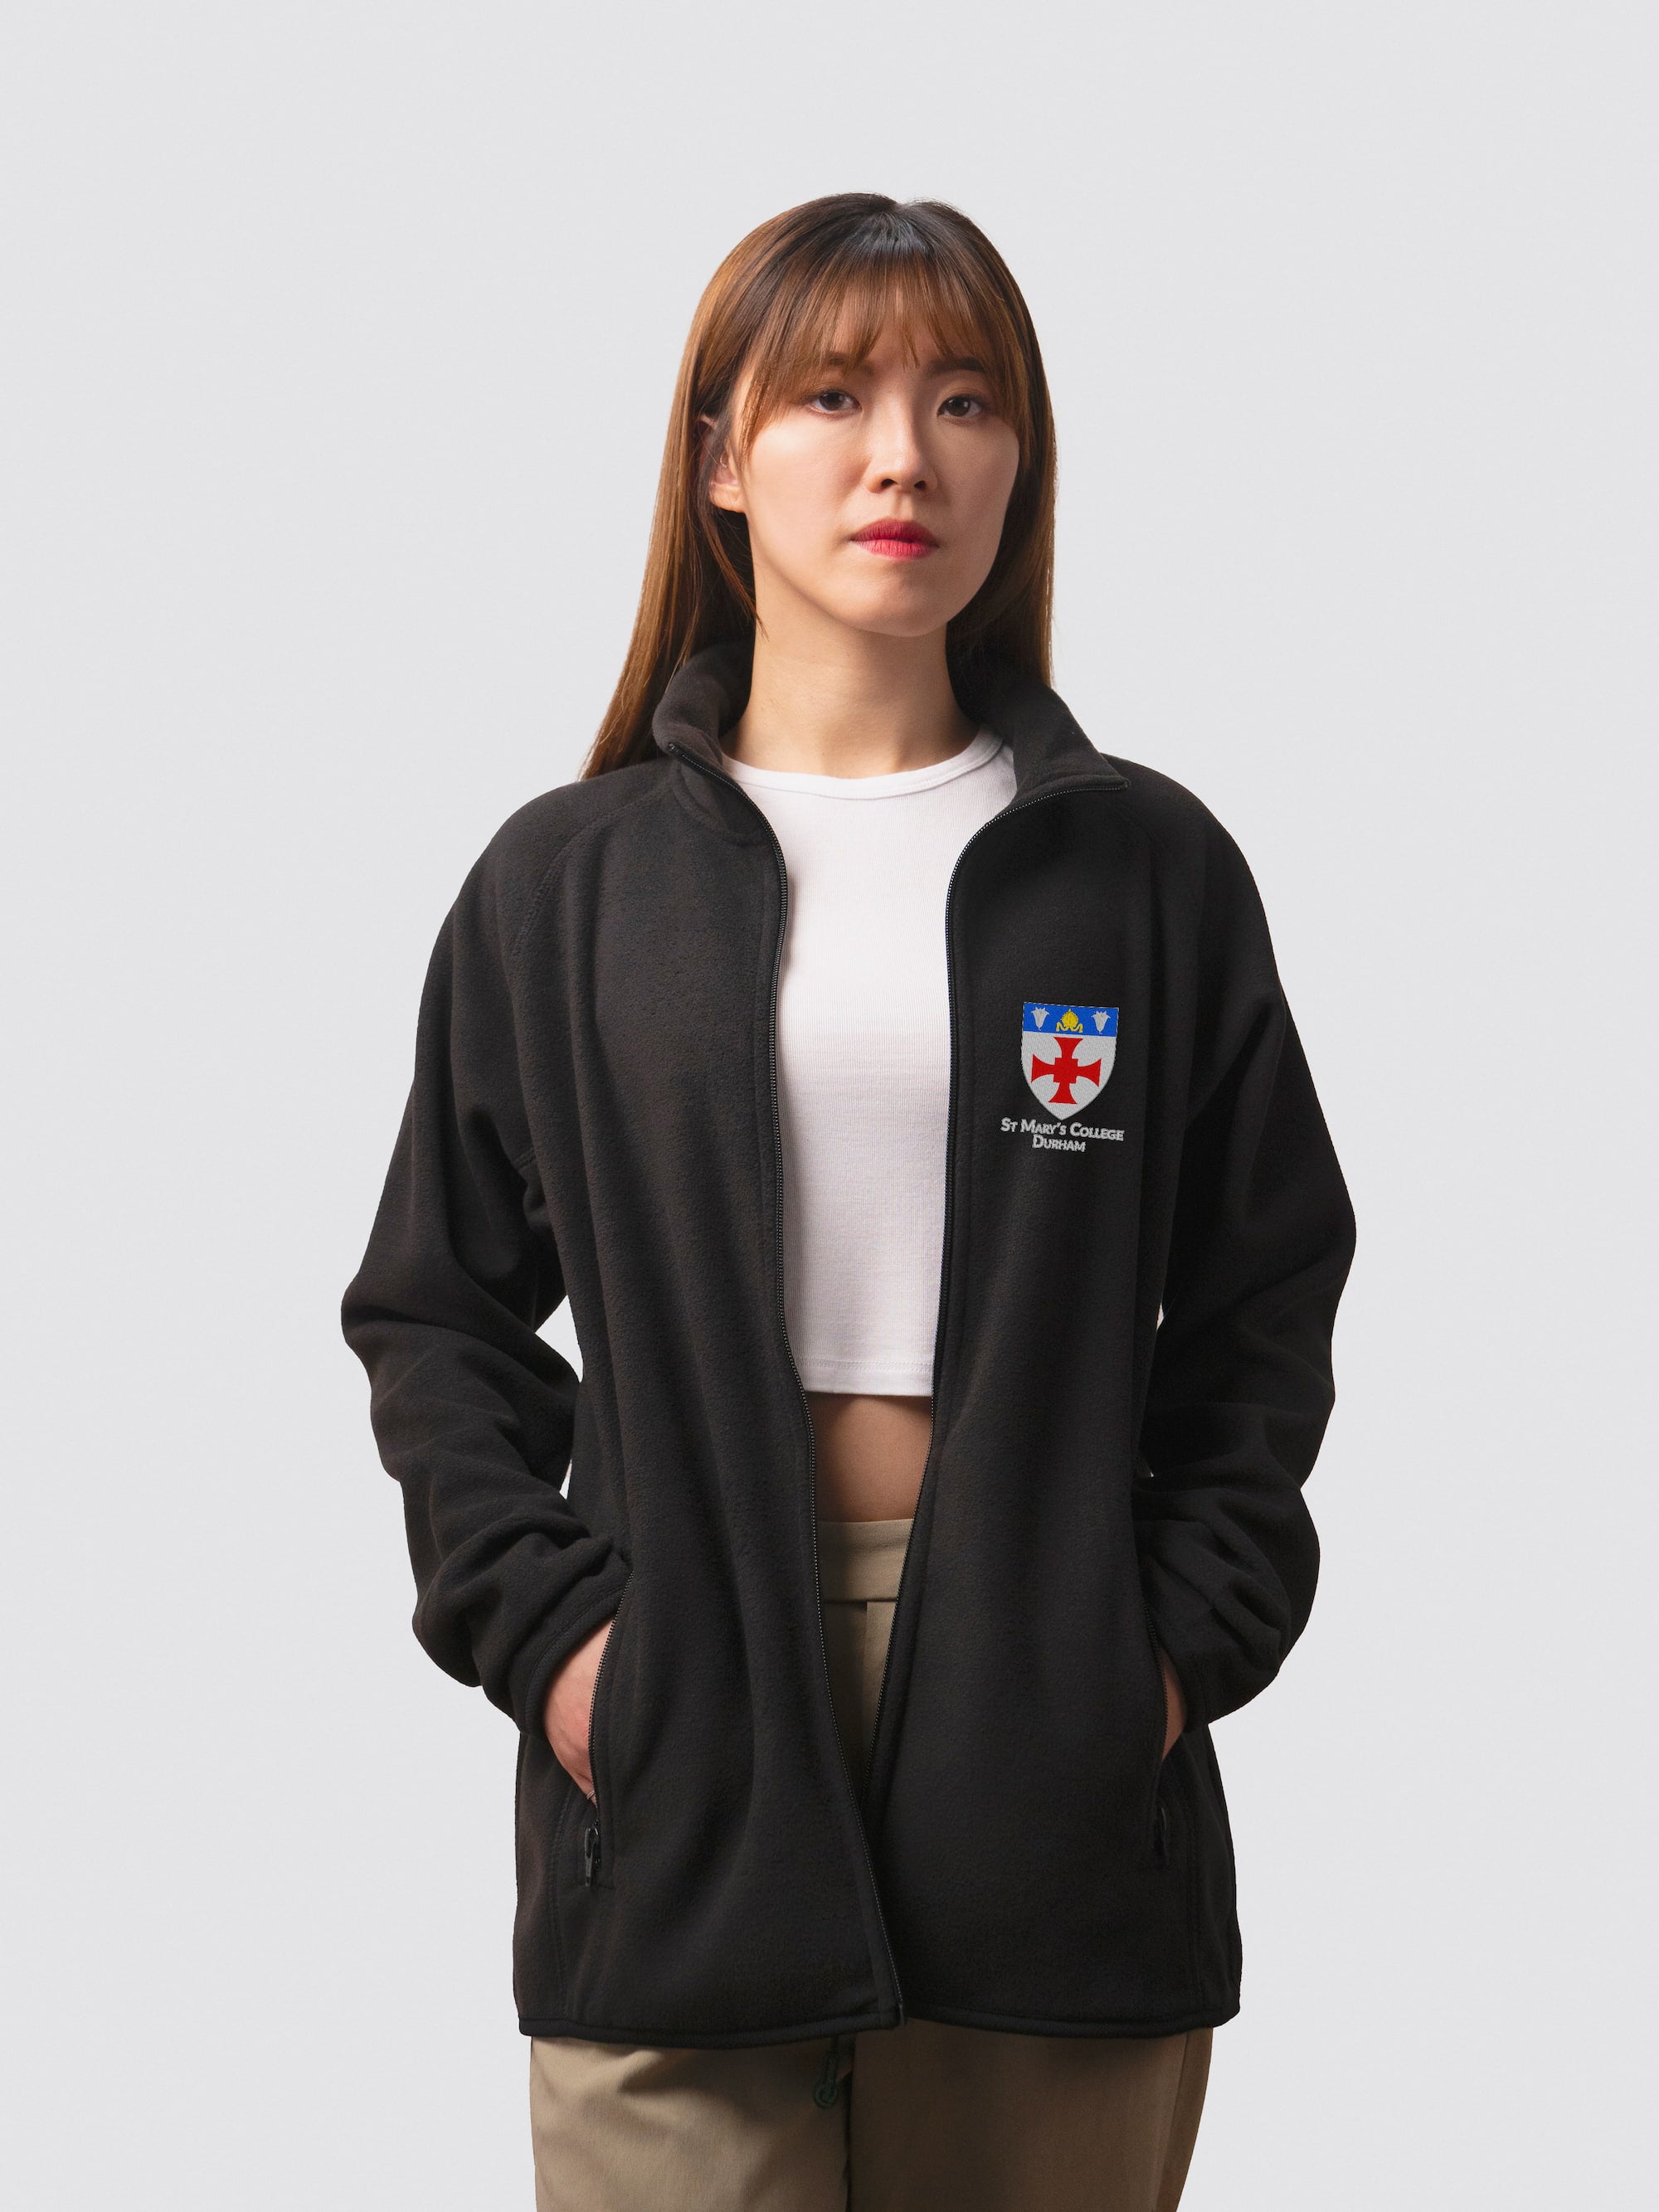 Custom student fleece, with St Mary's crest on the left chest